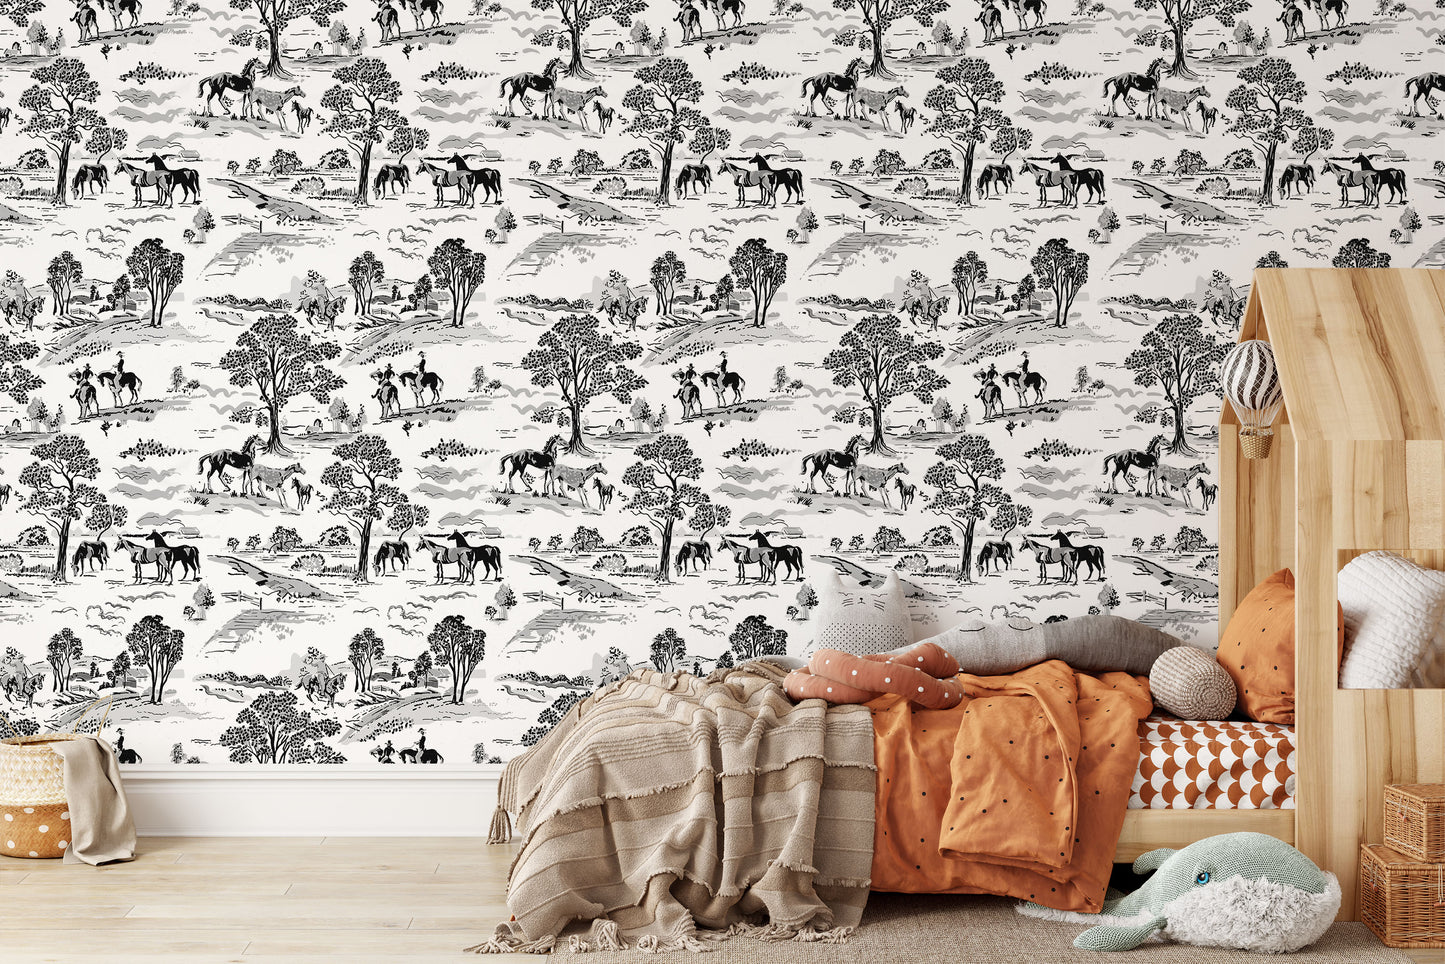 Cowboy black horses and trees on white background easy to install and remove peel and stick custom wallpaper available in different lengths/sizes locally created and printed in Canada. Removable, washable, durable, commercial grade, customizable and water proof.